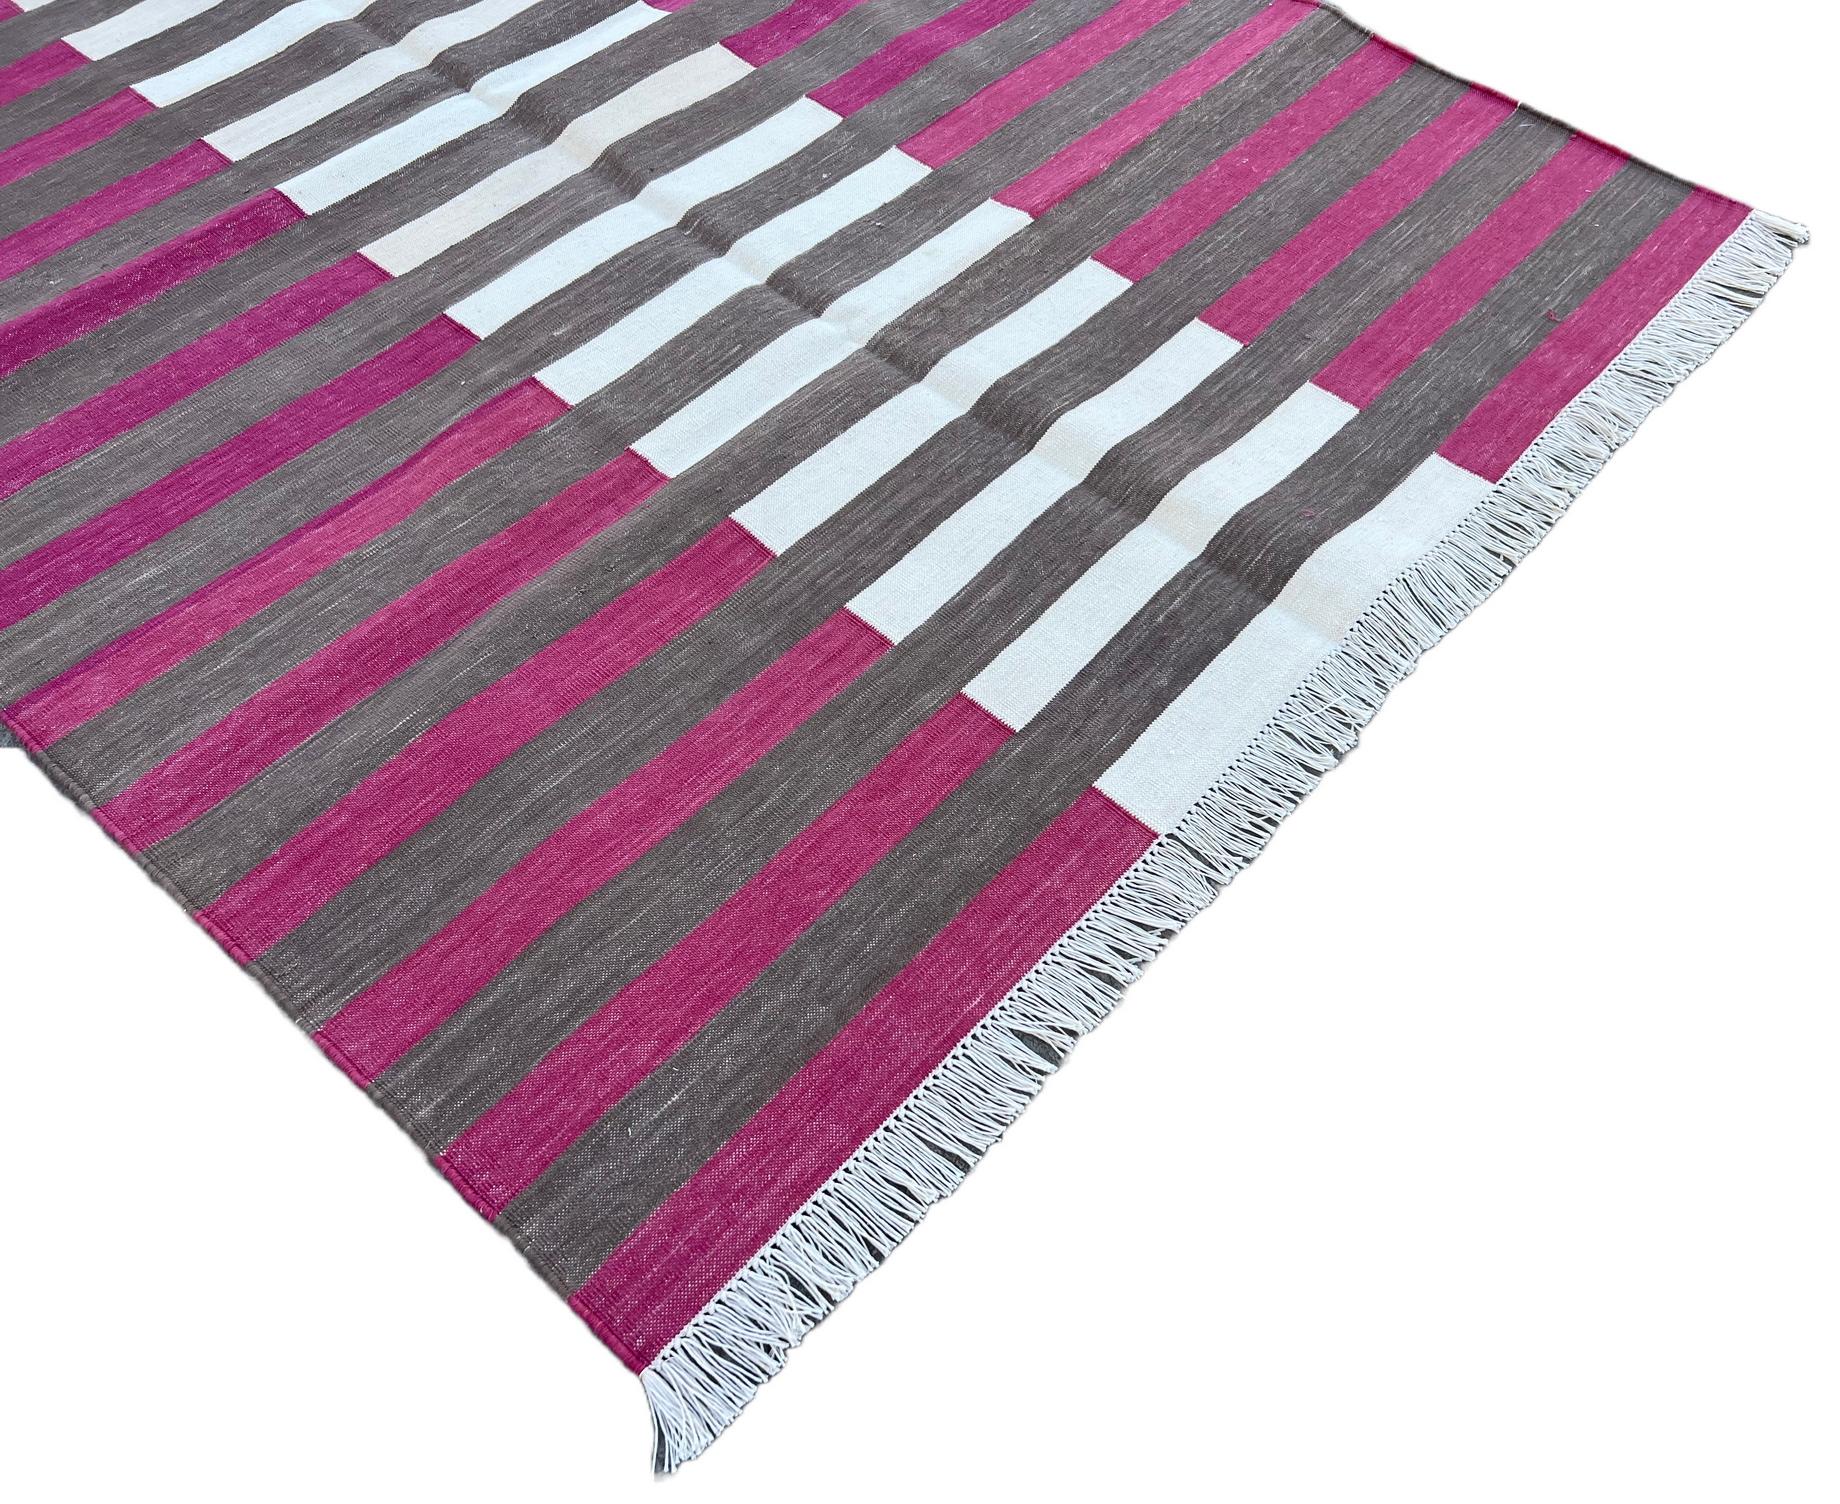 Hand-Woven Handmade Cotton Area Flat Weave Rug, 4x6 Brown And Pink Striped Indian Dhurrie For Sale